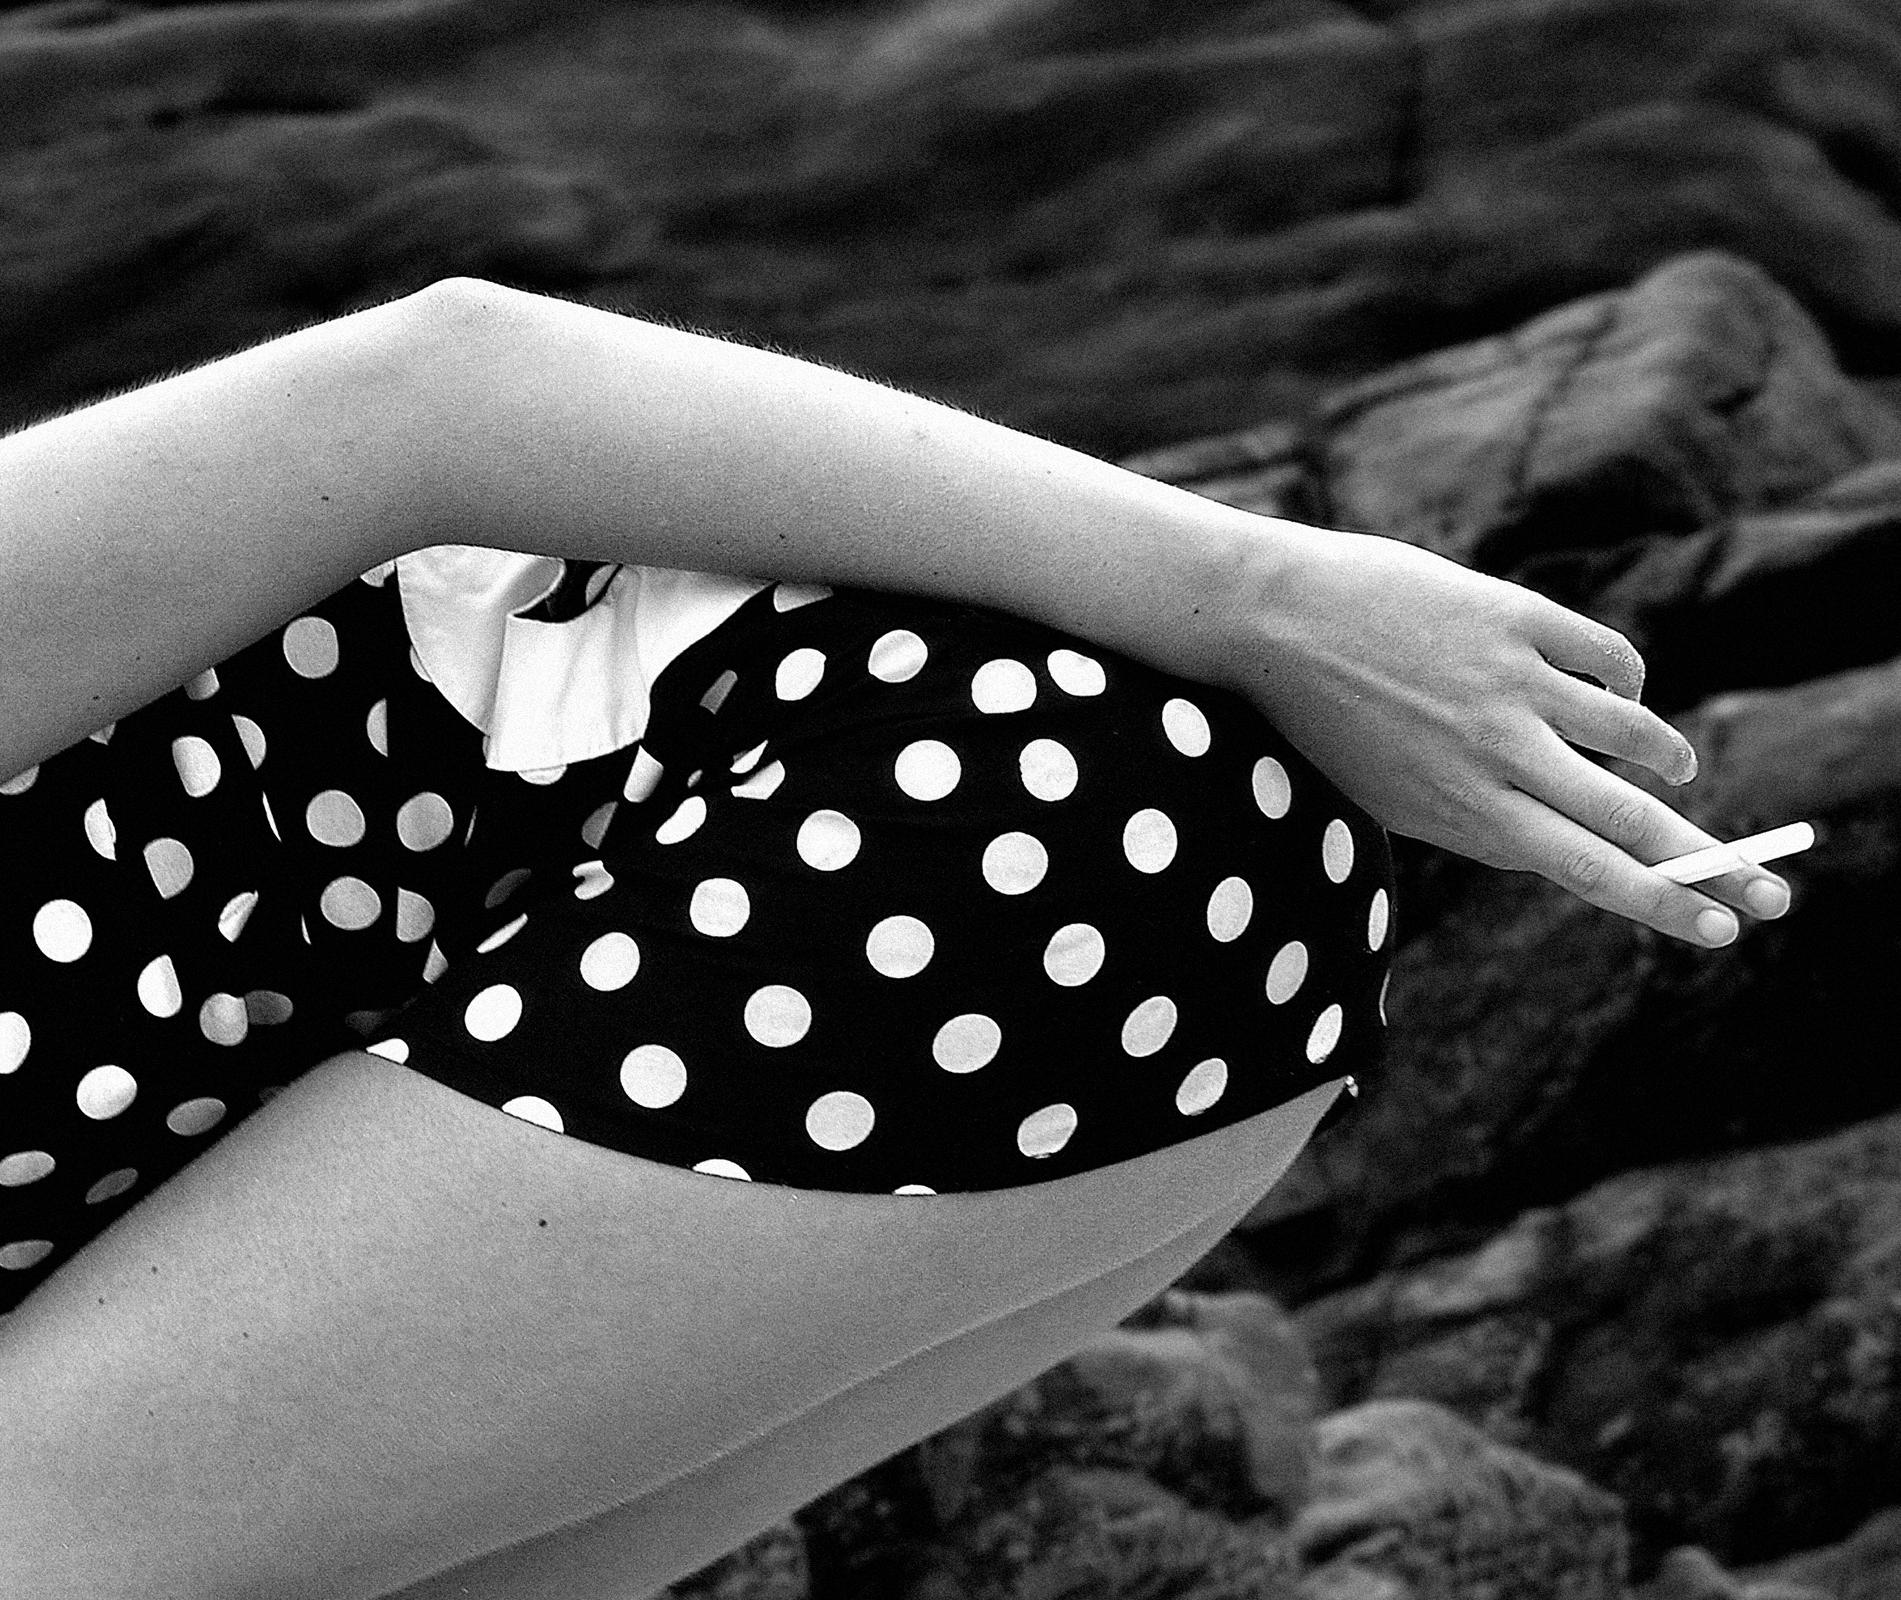 Ariane- Signed limited edition contemporary print, Black white photo, Beach, Model - Photograph by Ian Sanderson